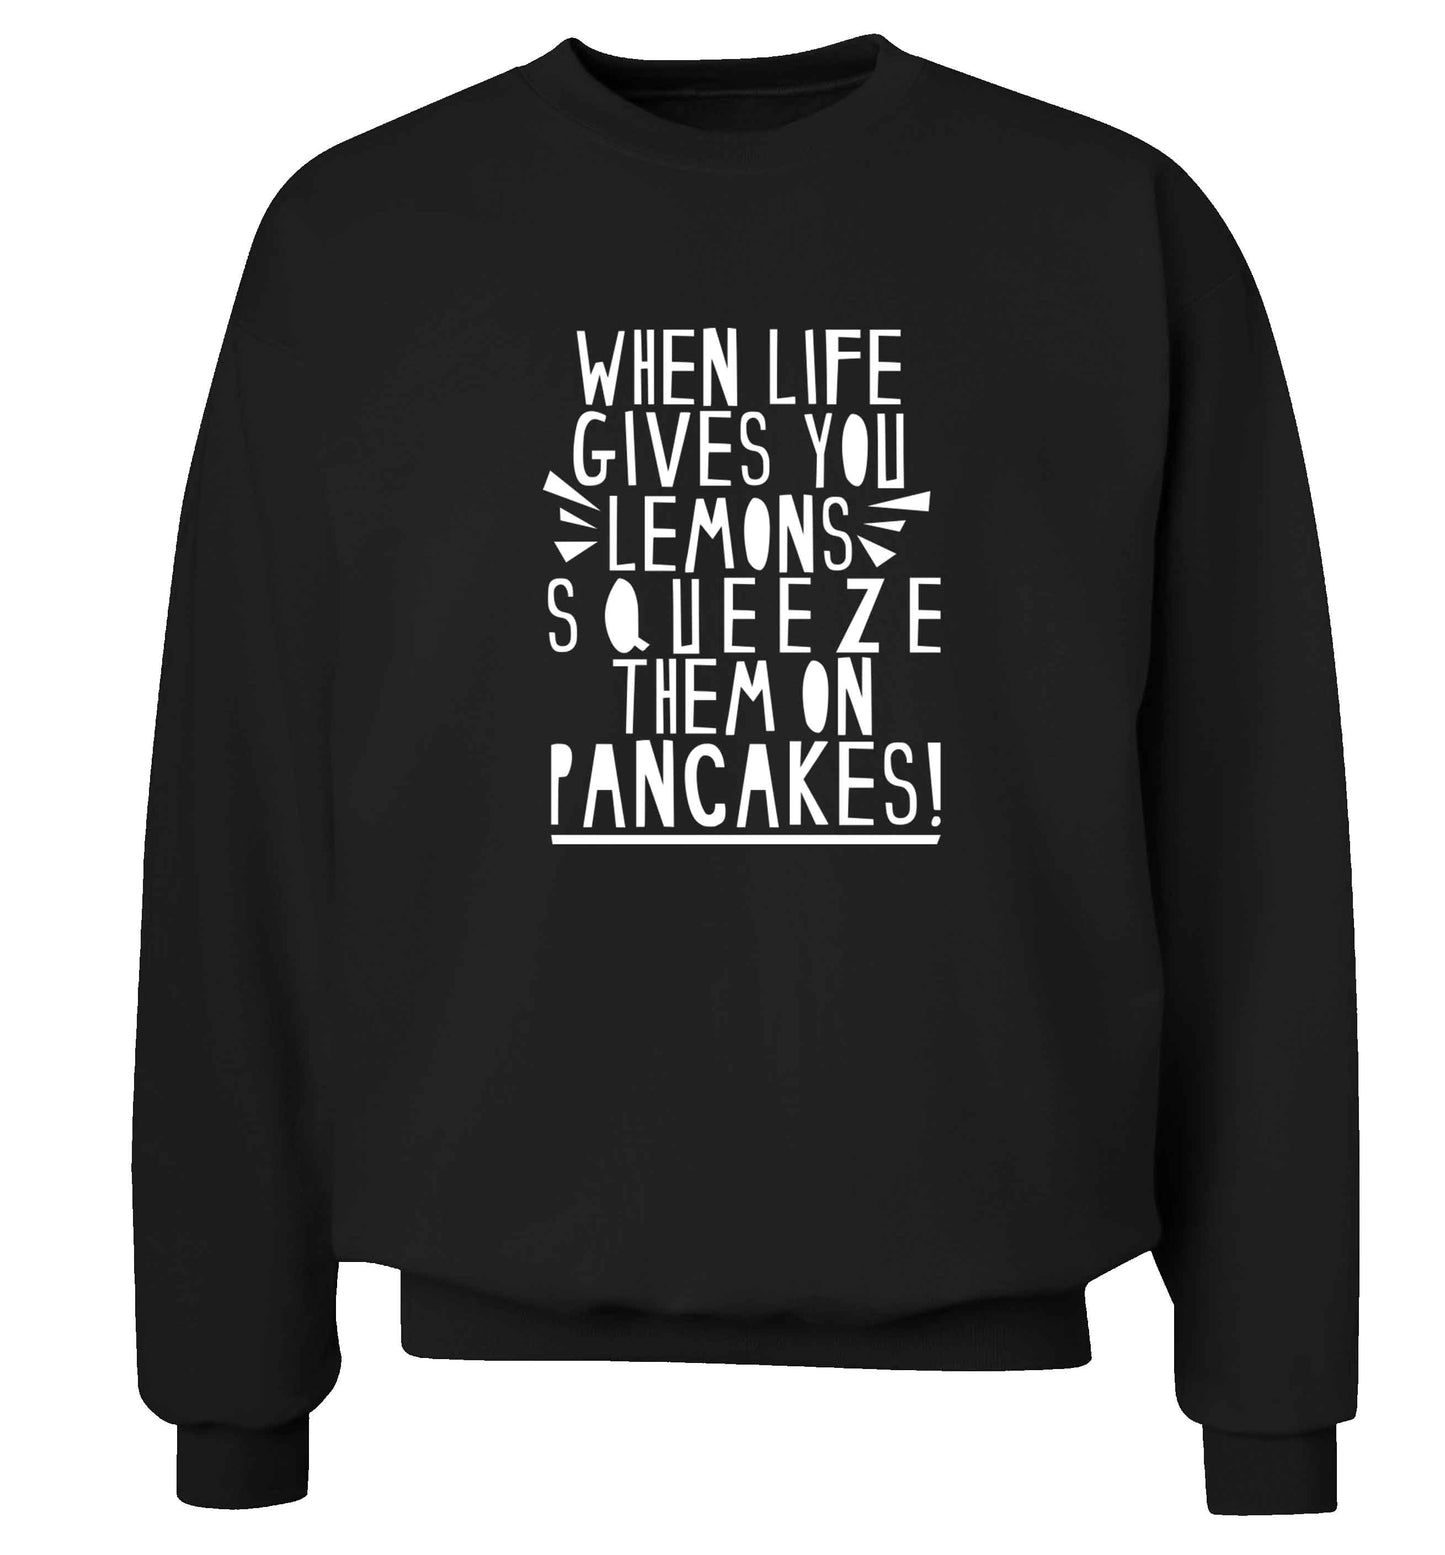 When life gives you lemons squeeze them on pancakes! adult's unisex black sweater 2XL